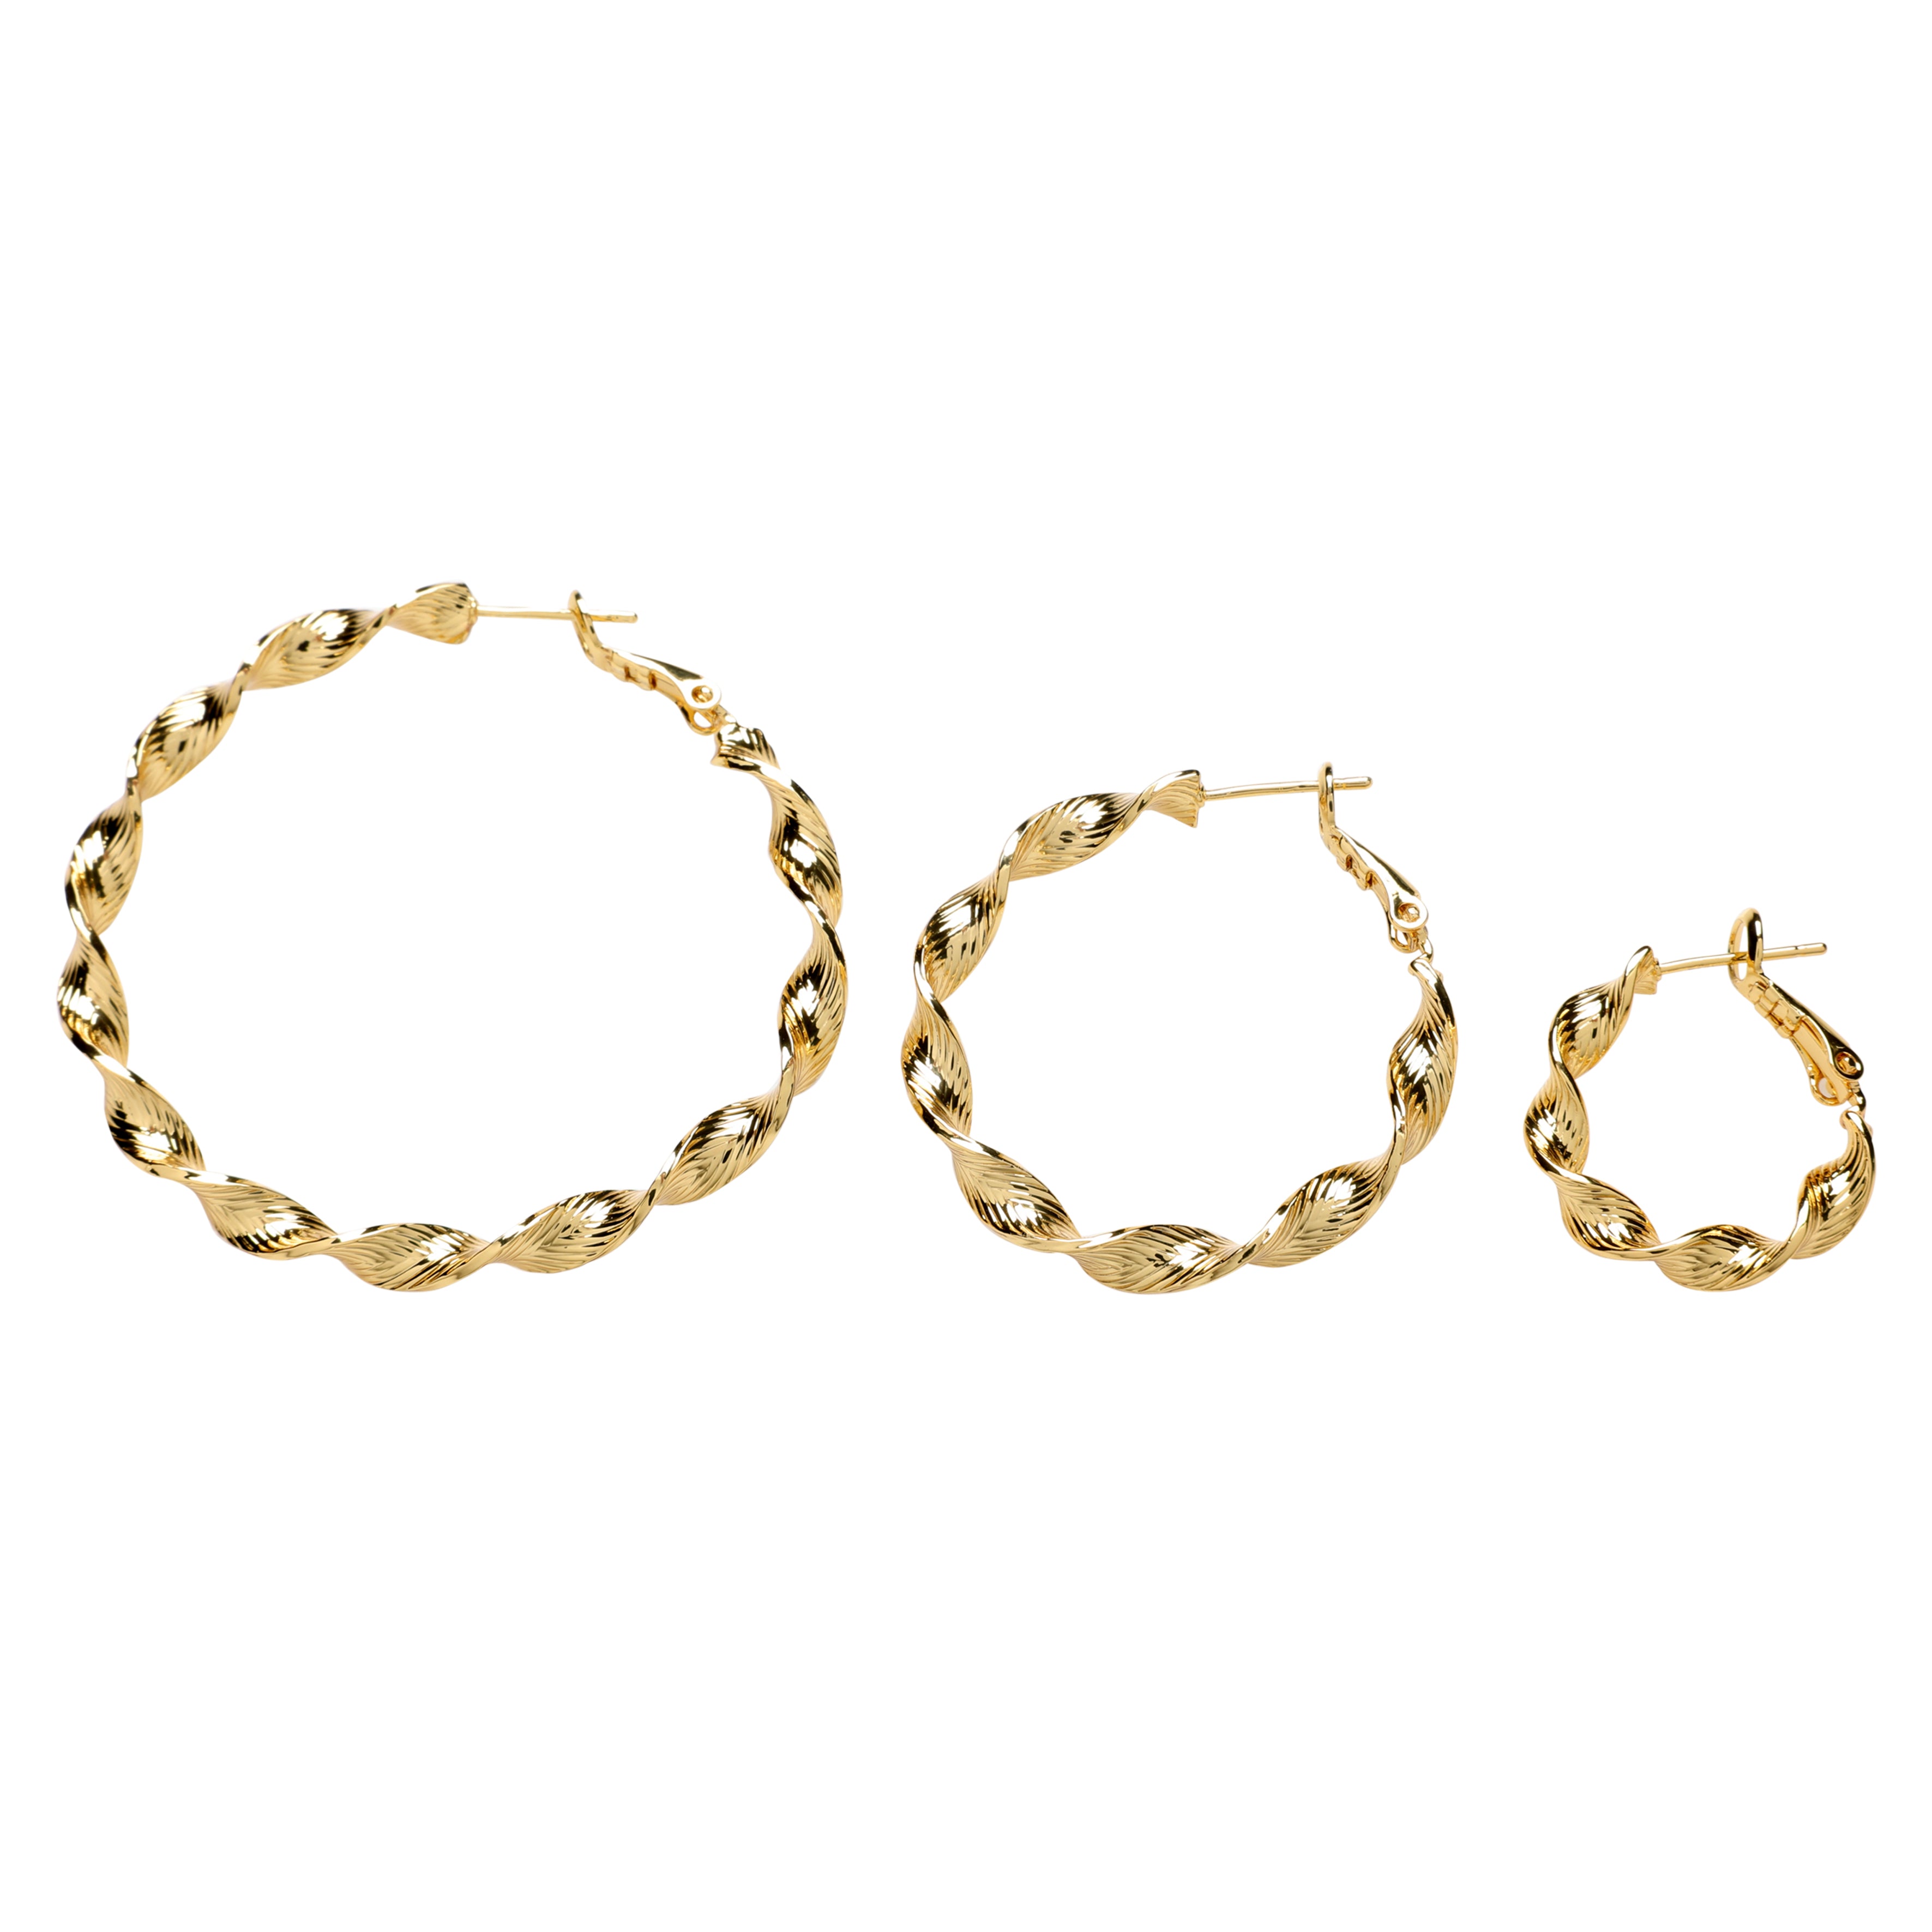 Twisted hoops - 35 mm, 18K gold-plated, 1 pair